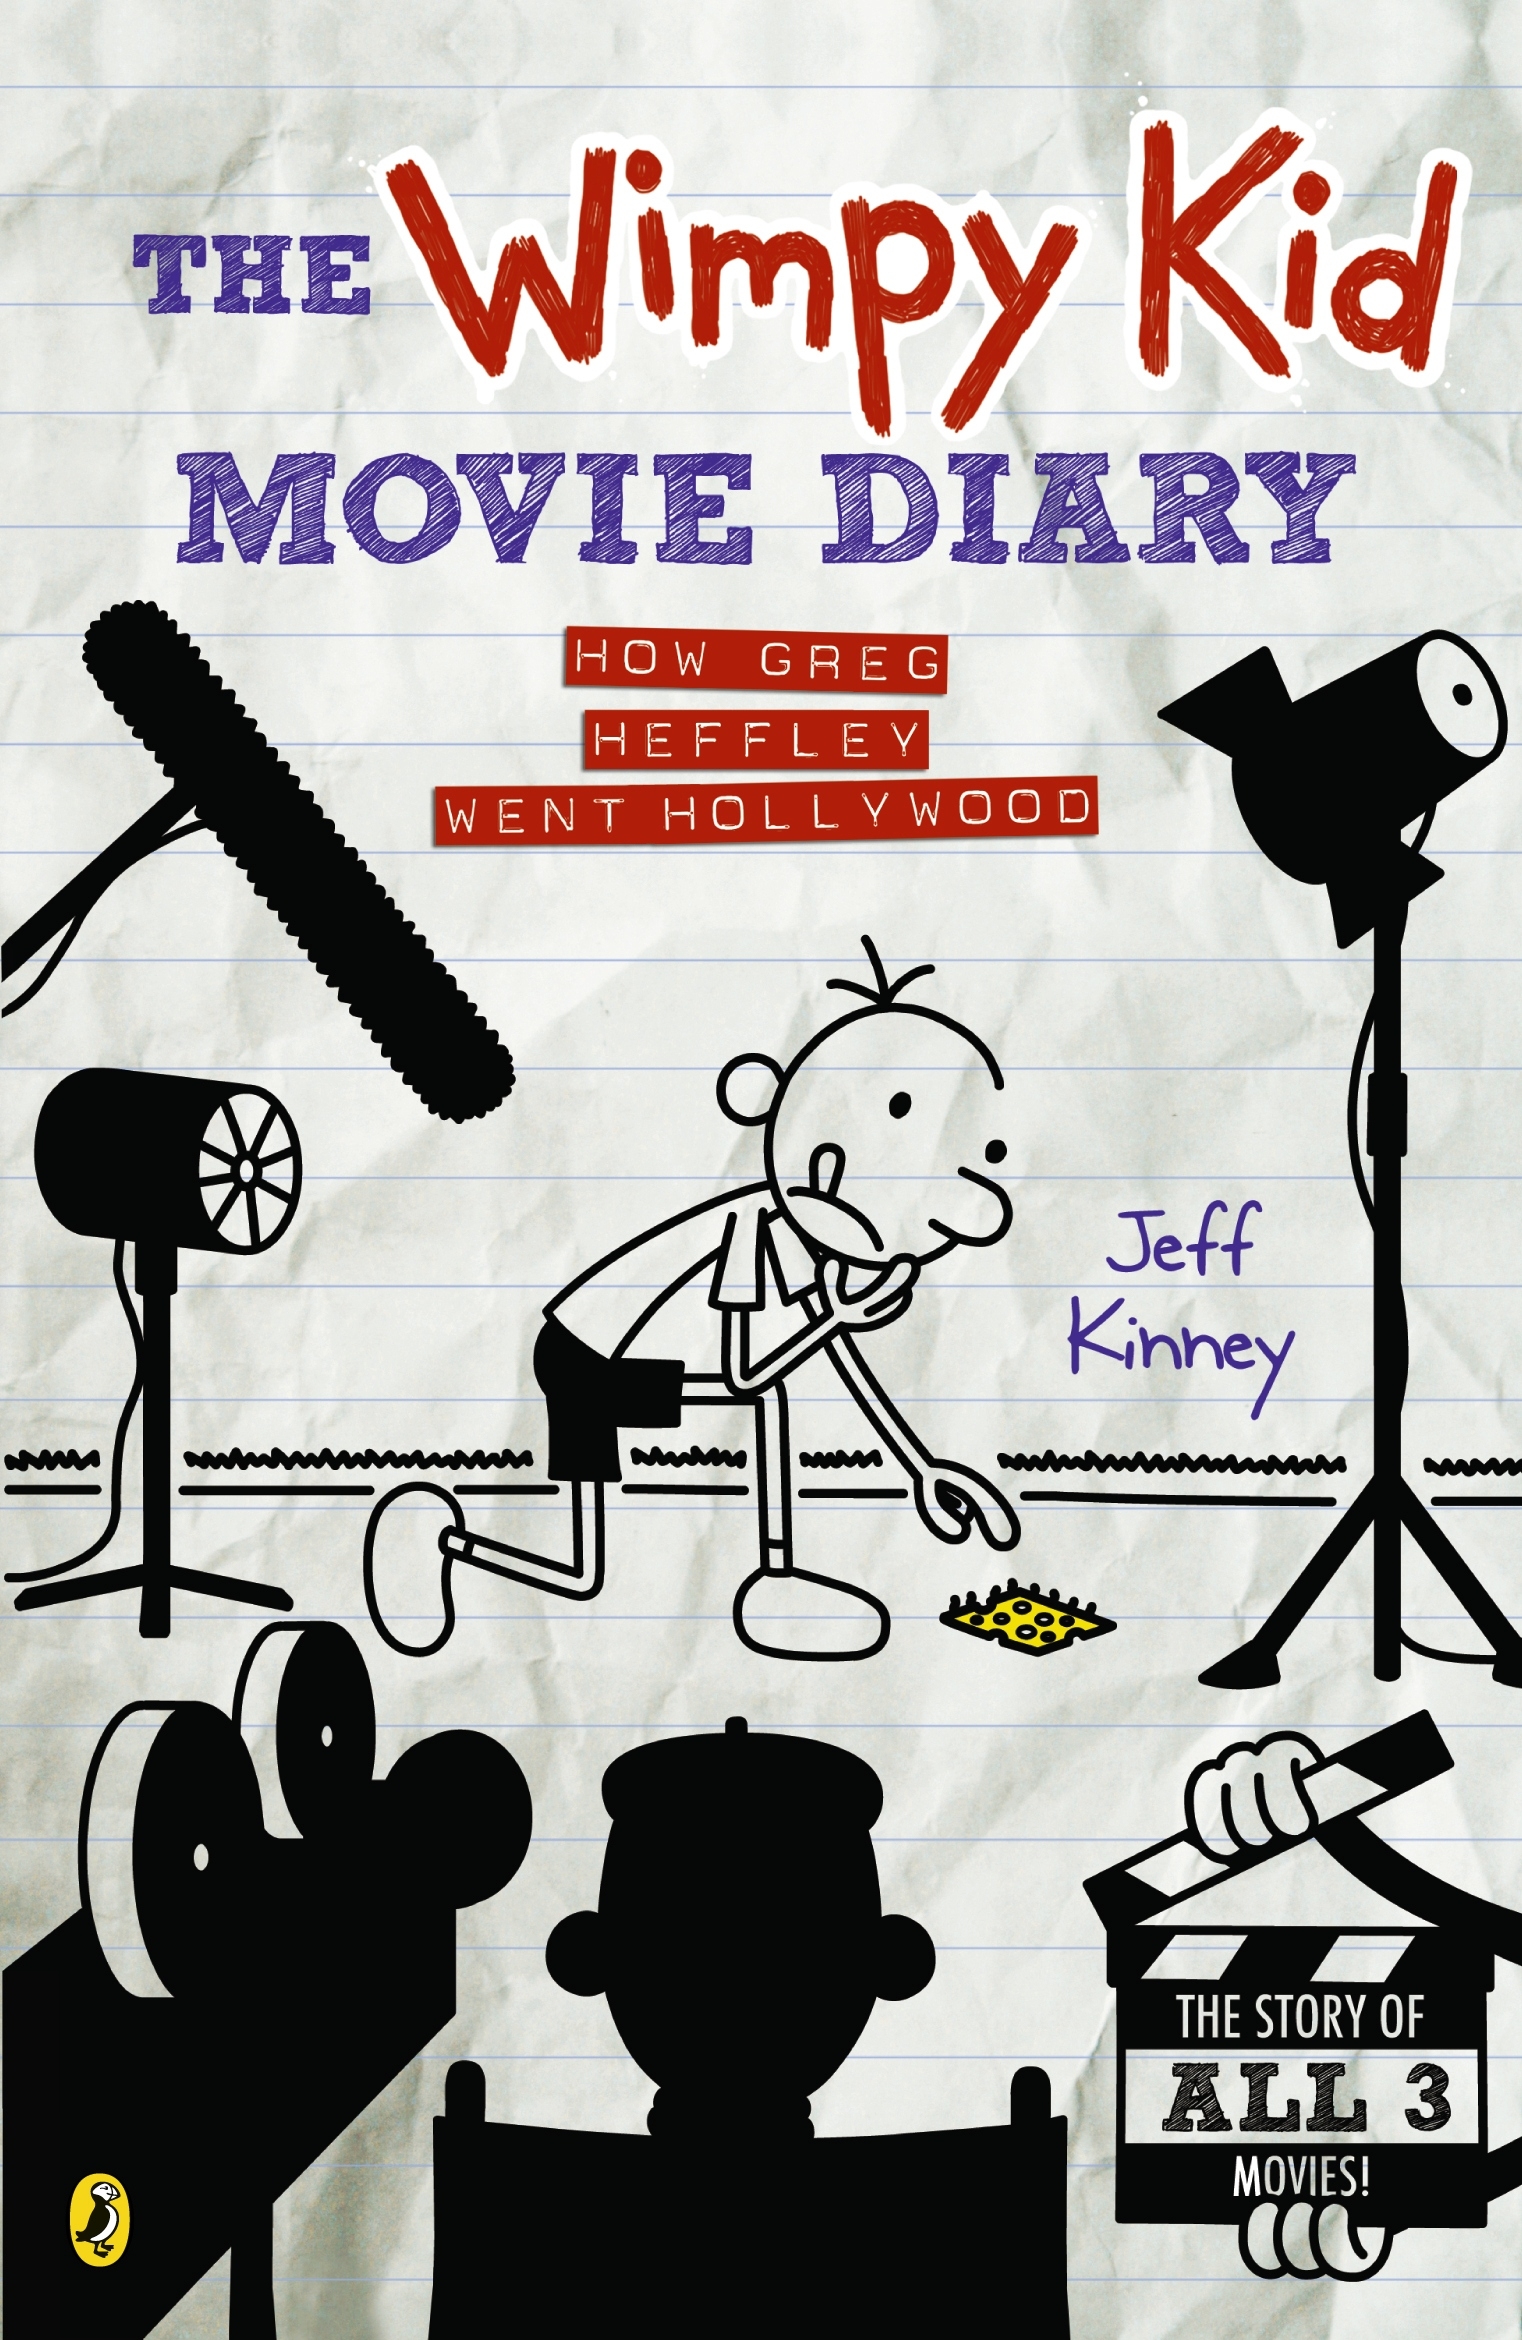 The Wimpy Kid Movie Diary Volume 3 by Jeff Kinney - Penguin Books